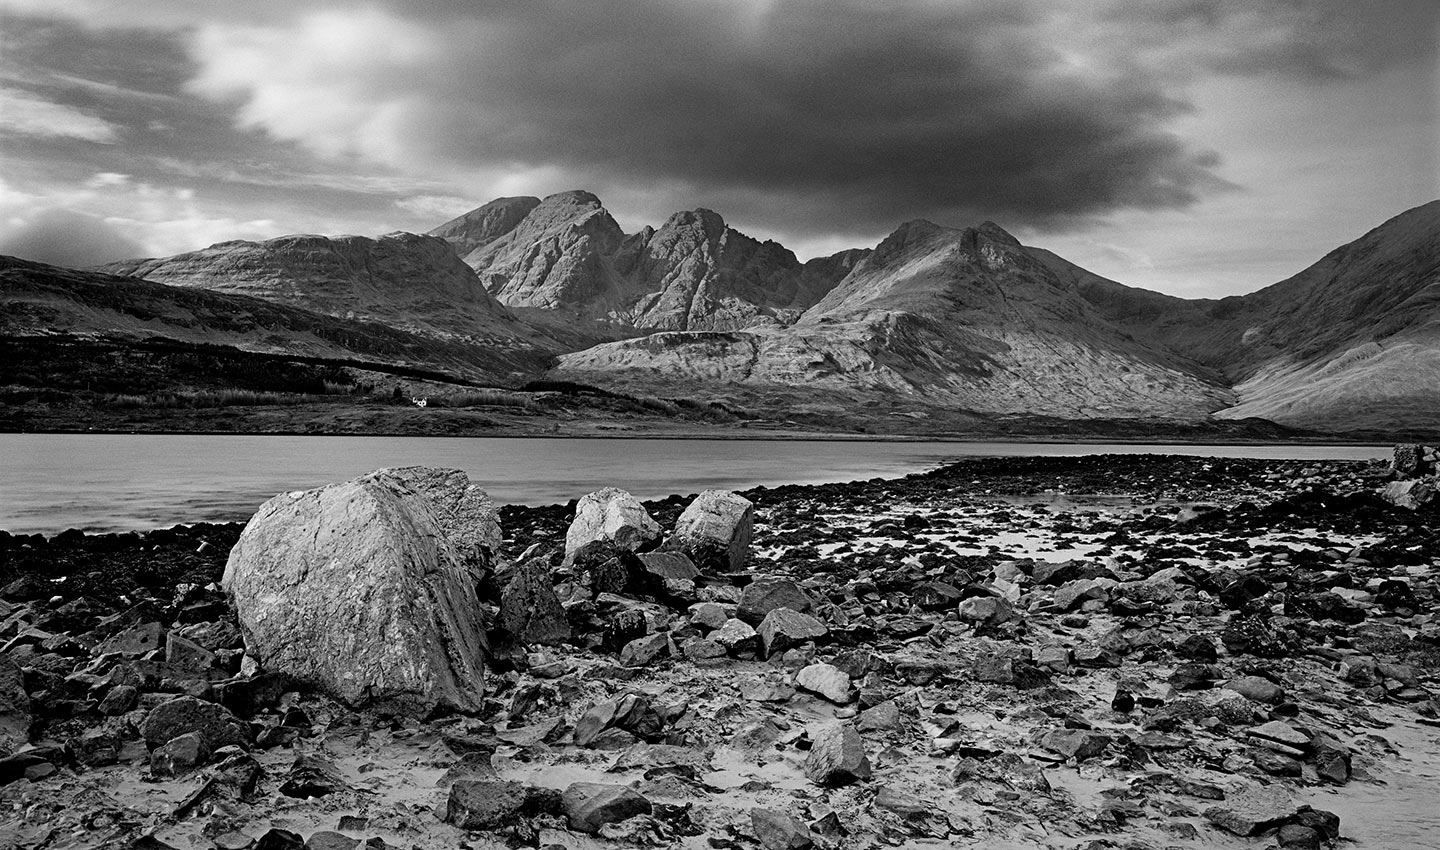 Cuillin_Mountains_Isle_of_Skye-Cuilins_Scotland-Scottish_landscape-Photography-black_and_white-Loch-Lindsay_Robertson